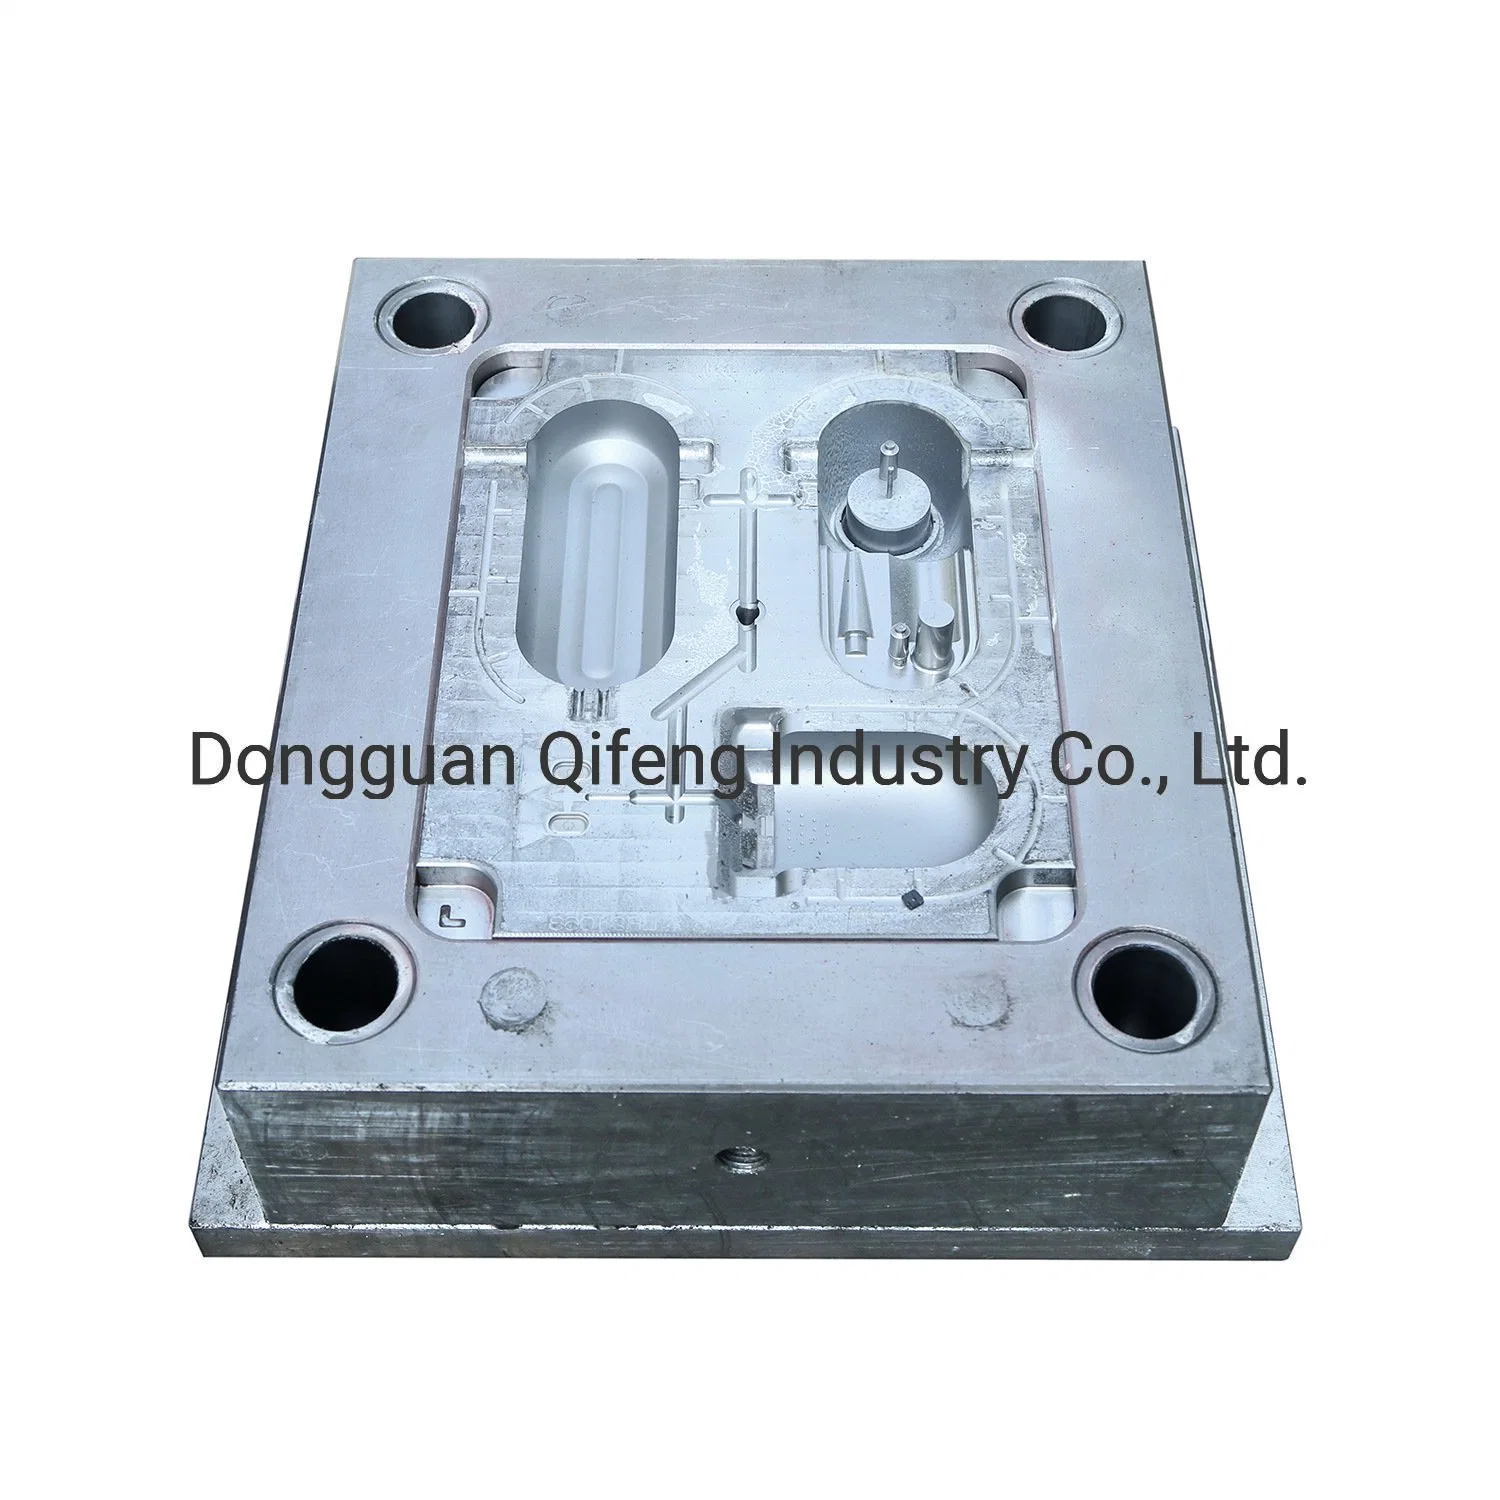 OEM Customized Spare Part Plastic Injection Molding Company Supply Hotsales Injection Tooling Matrix Molds Consumer Products Extrusion Service and OEM Assembly